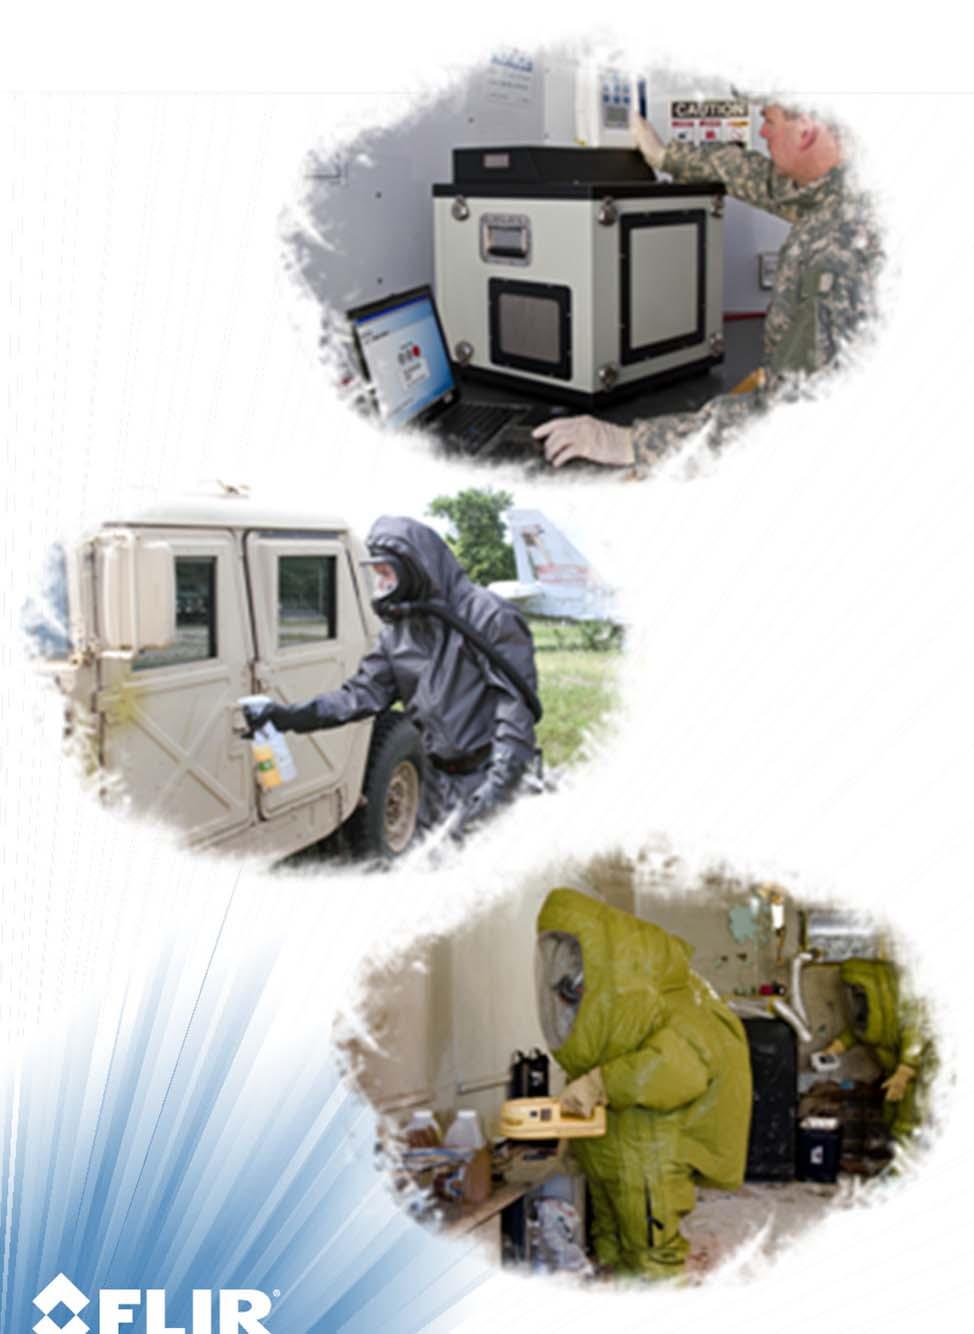 CBRNE Chemical/Biological First portable Mass Spectrometer Chem/Bio product revenue grew 100%+ Joint Services